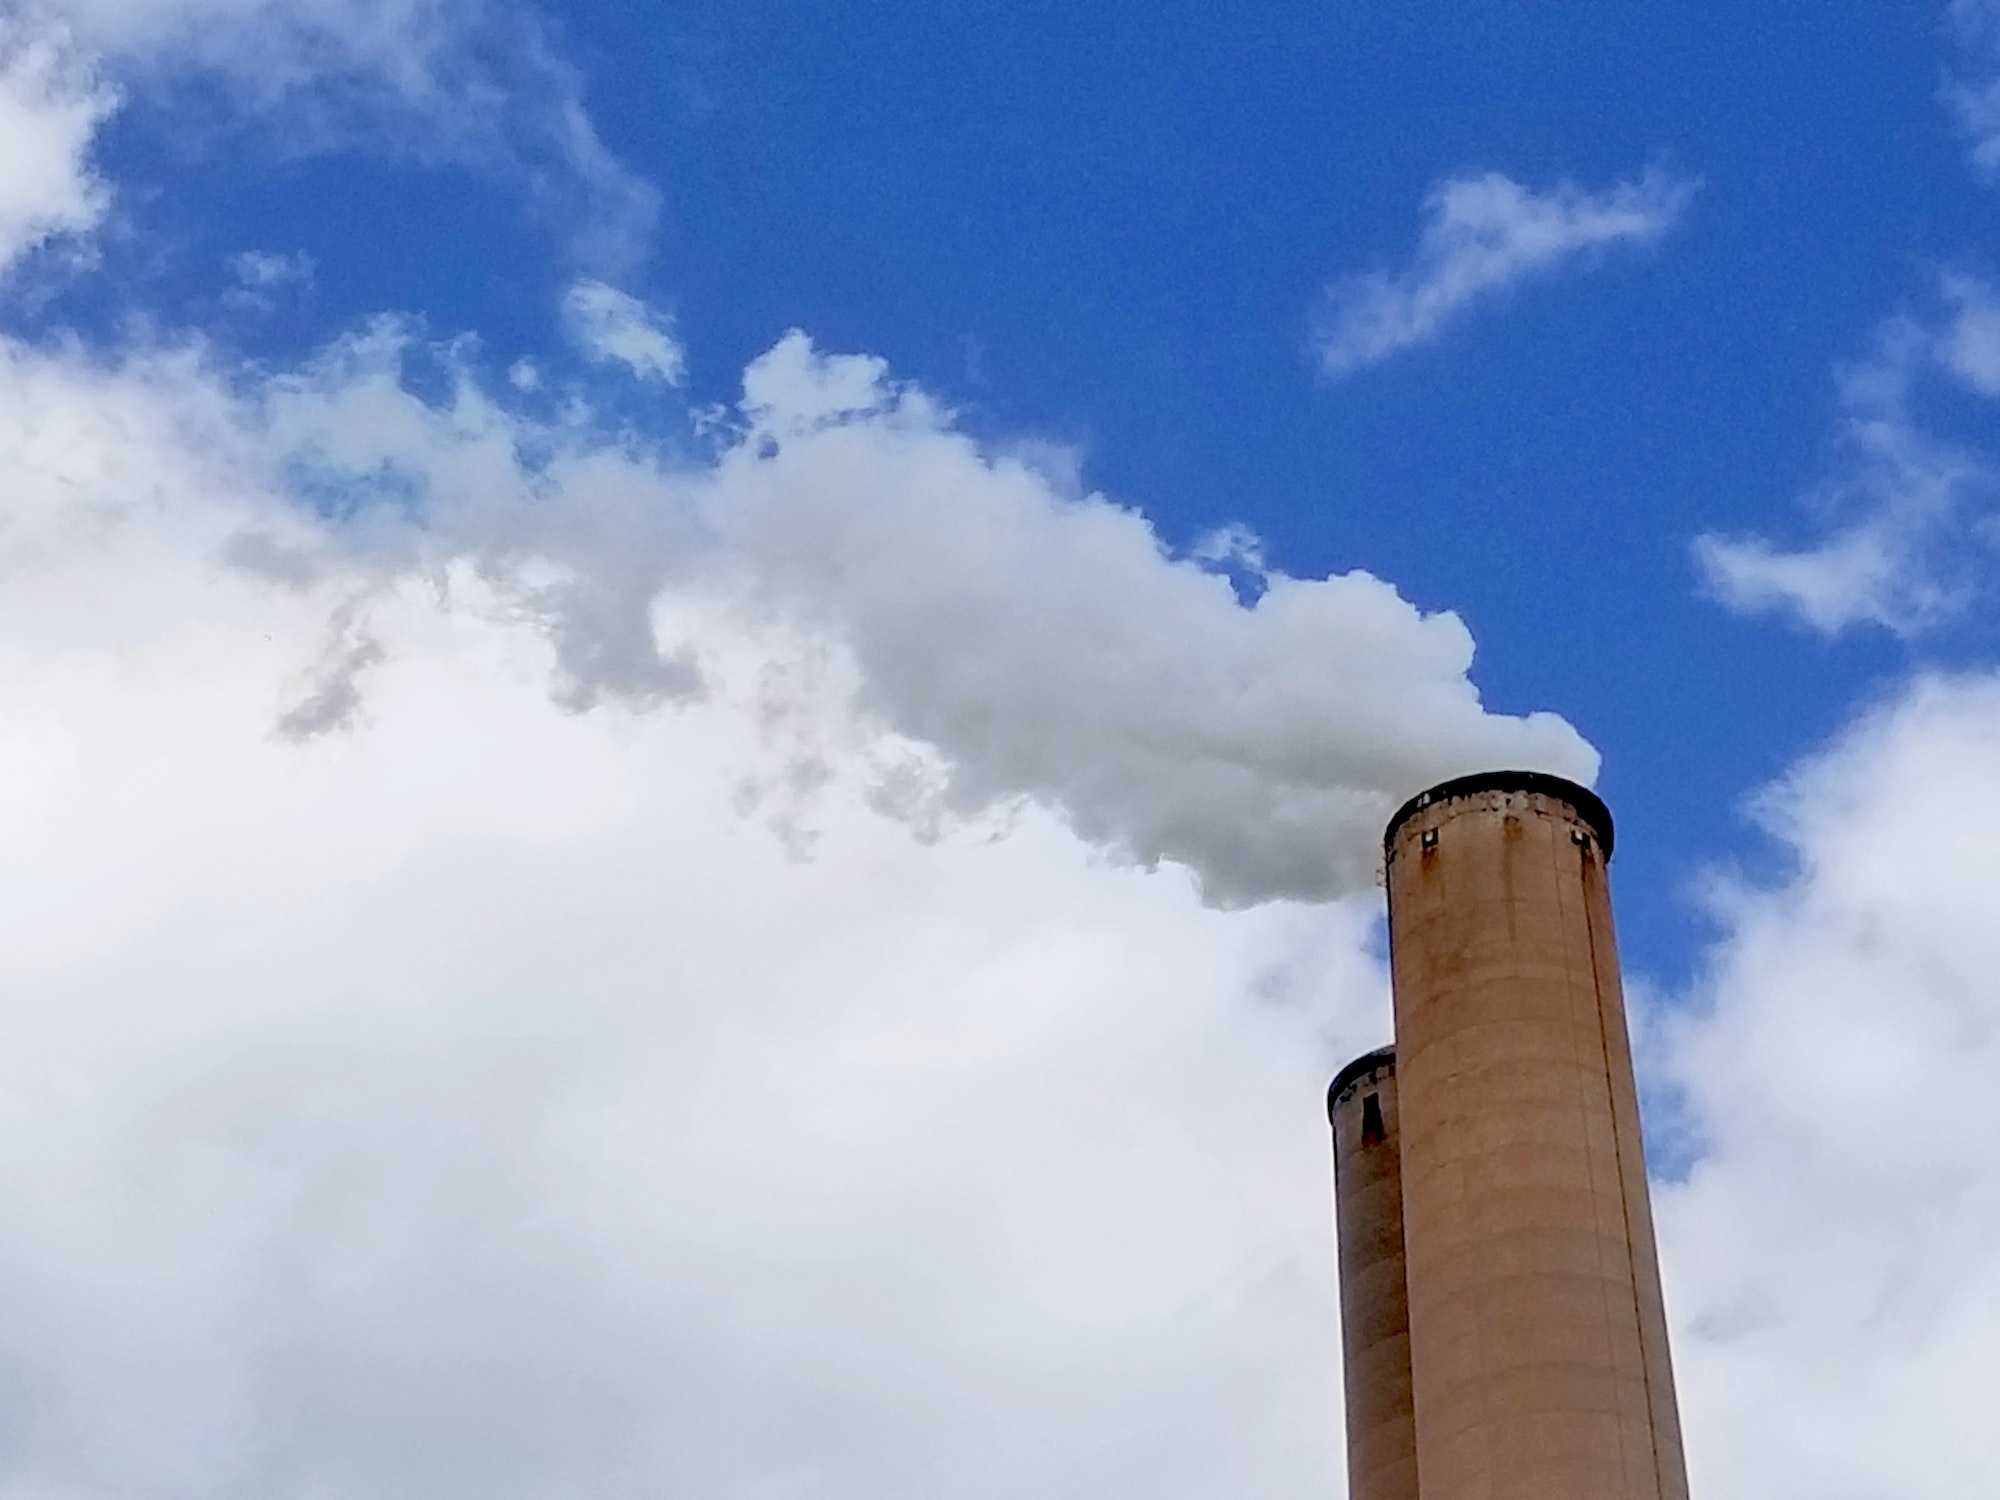 Smokestacks with billowing grey smoke coming out of them are seen in stark contrast to a bright blue